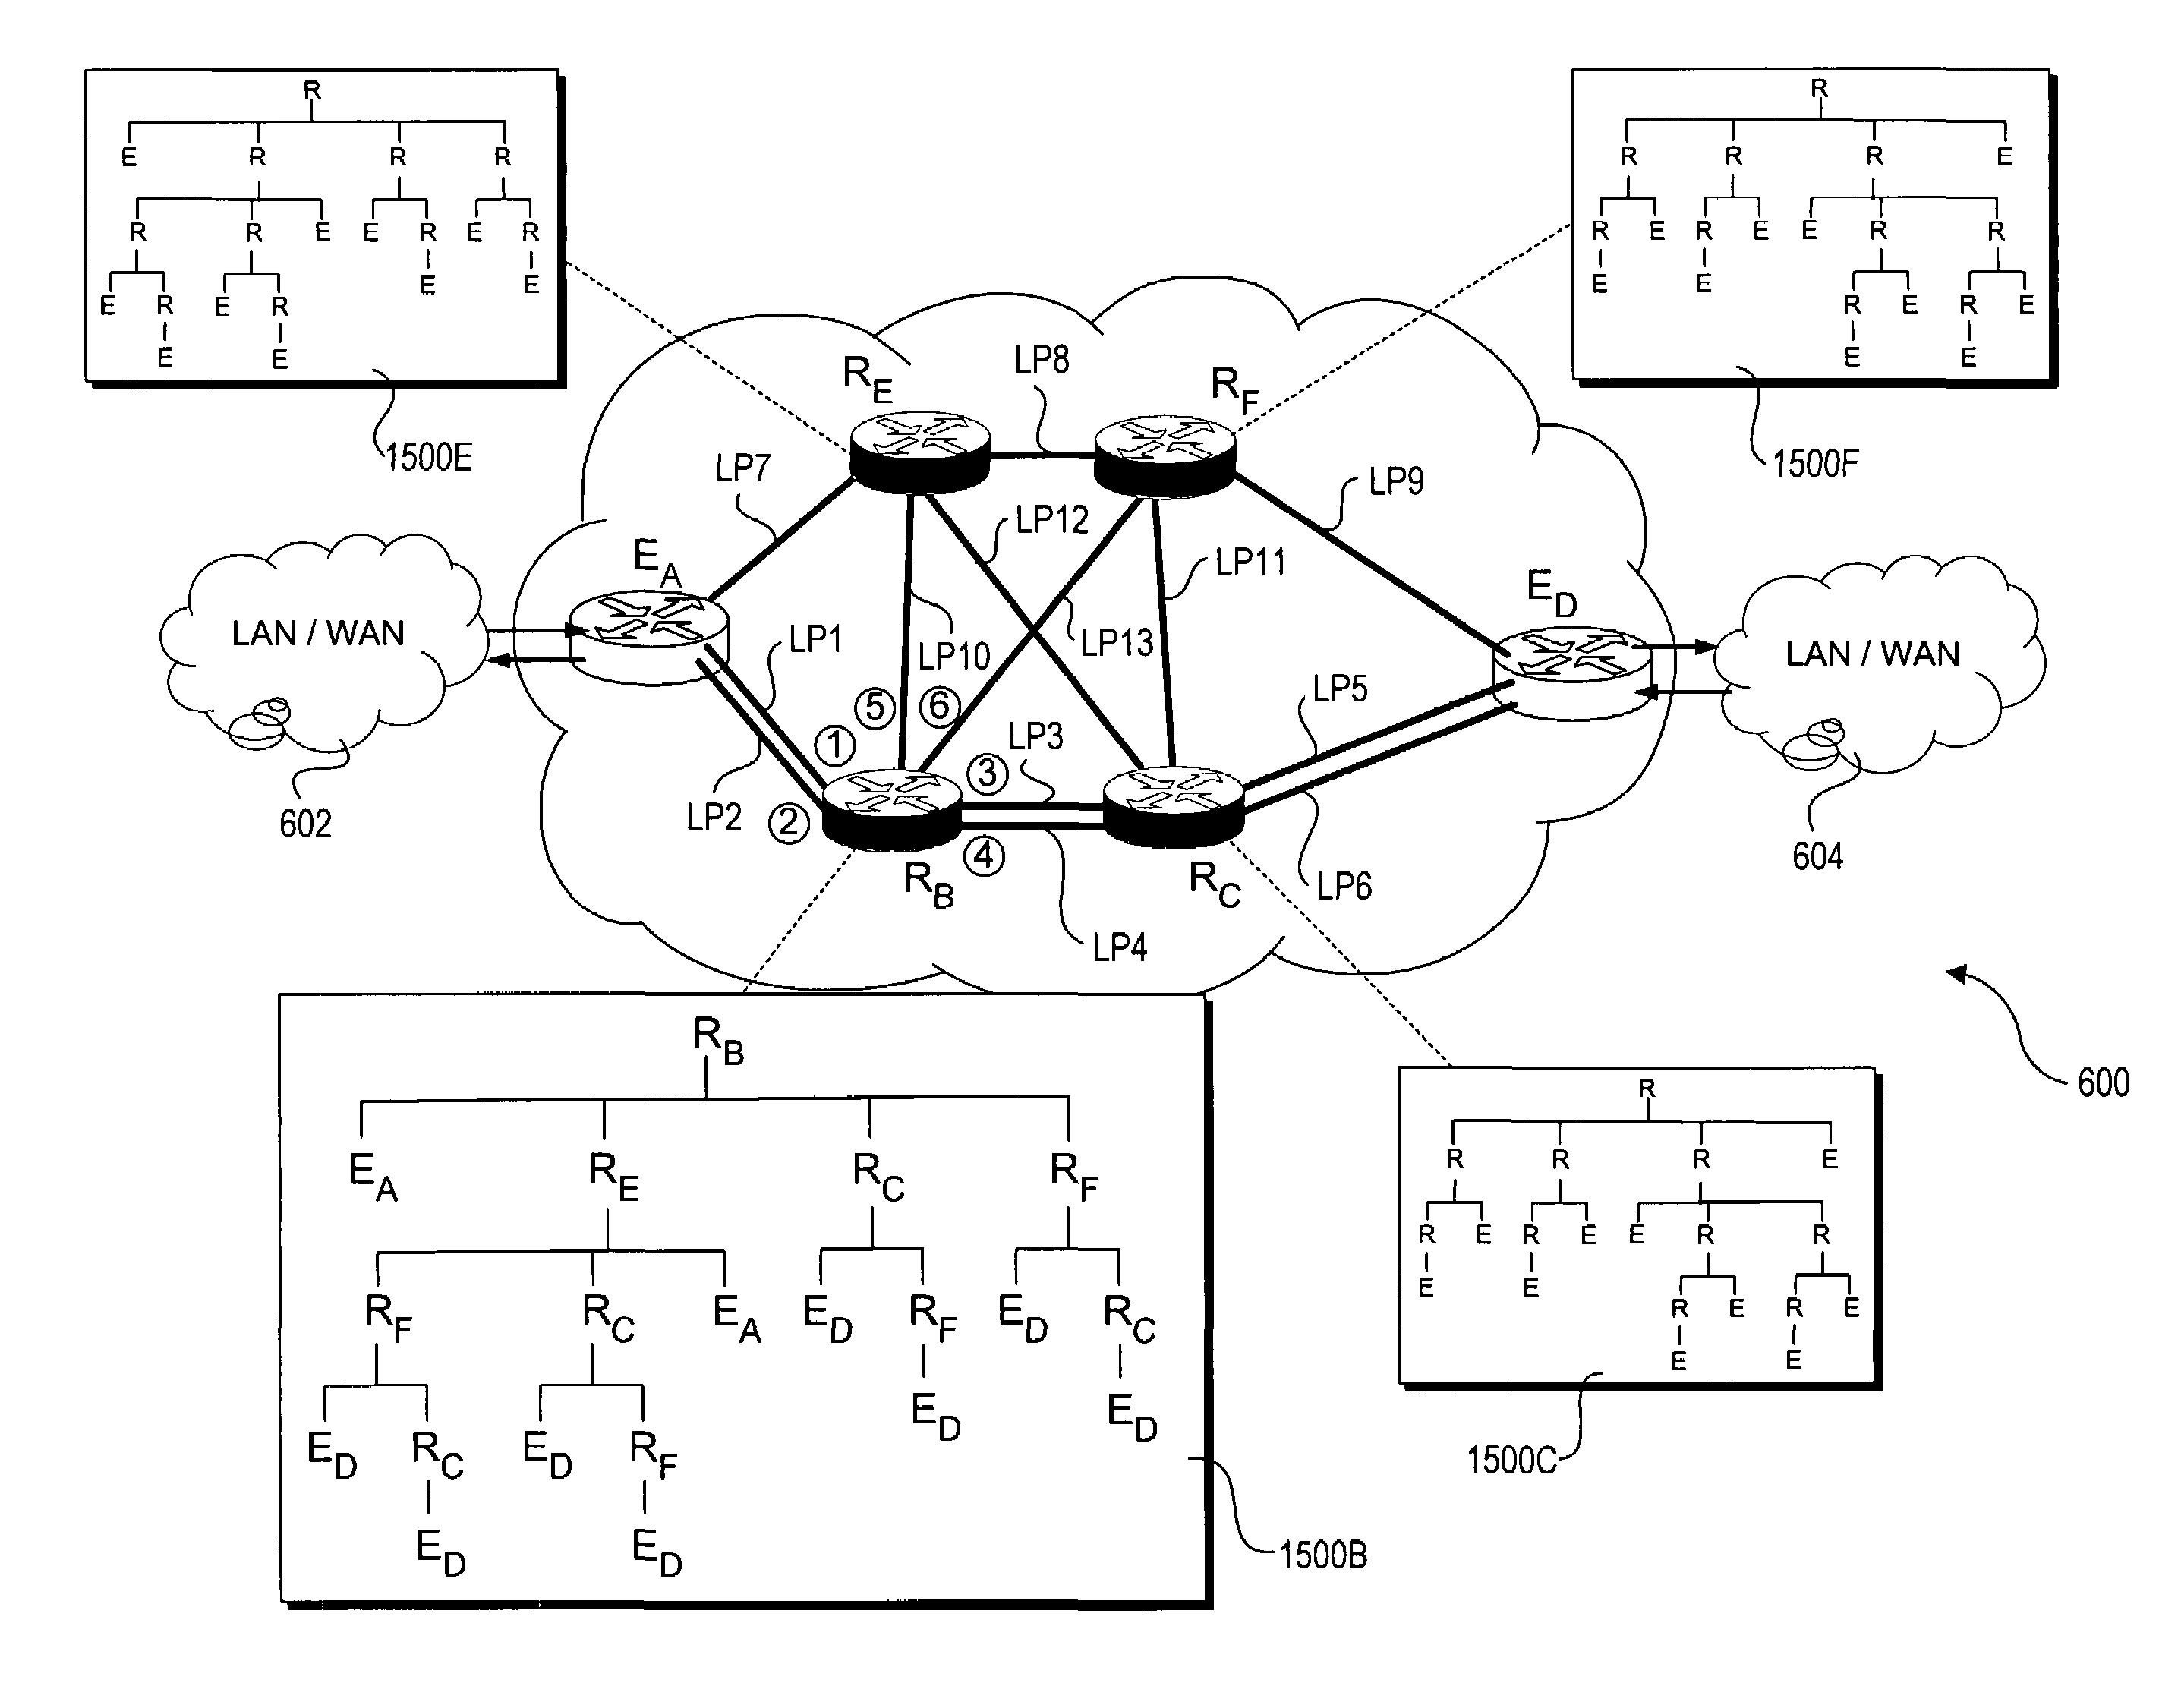 Dynamic route discovery for optical switched networks using peer routing